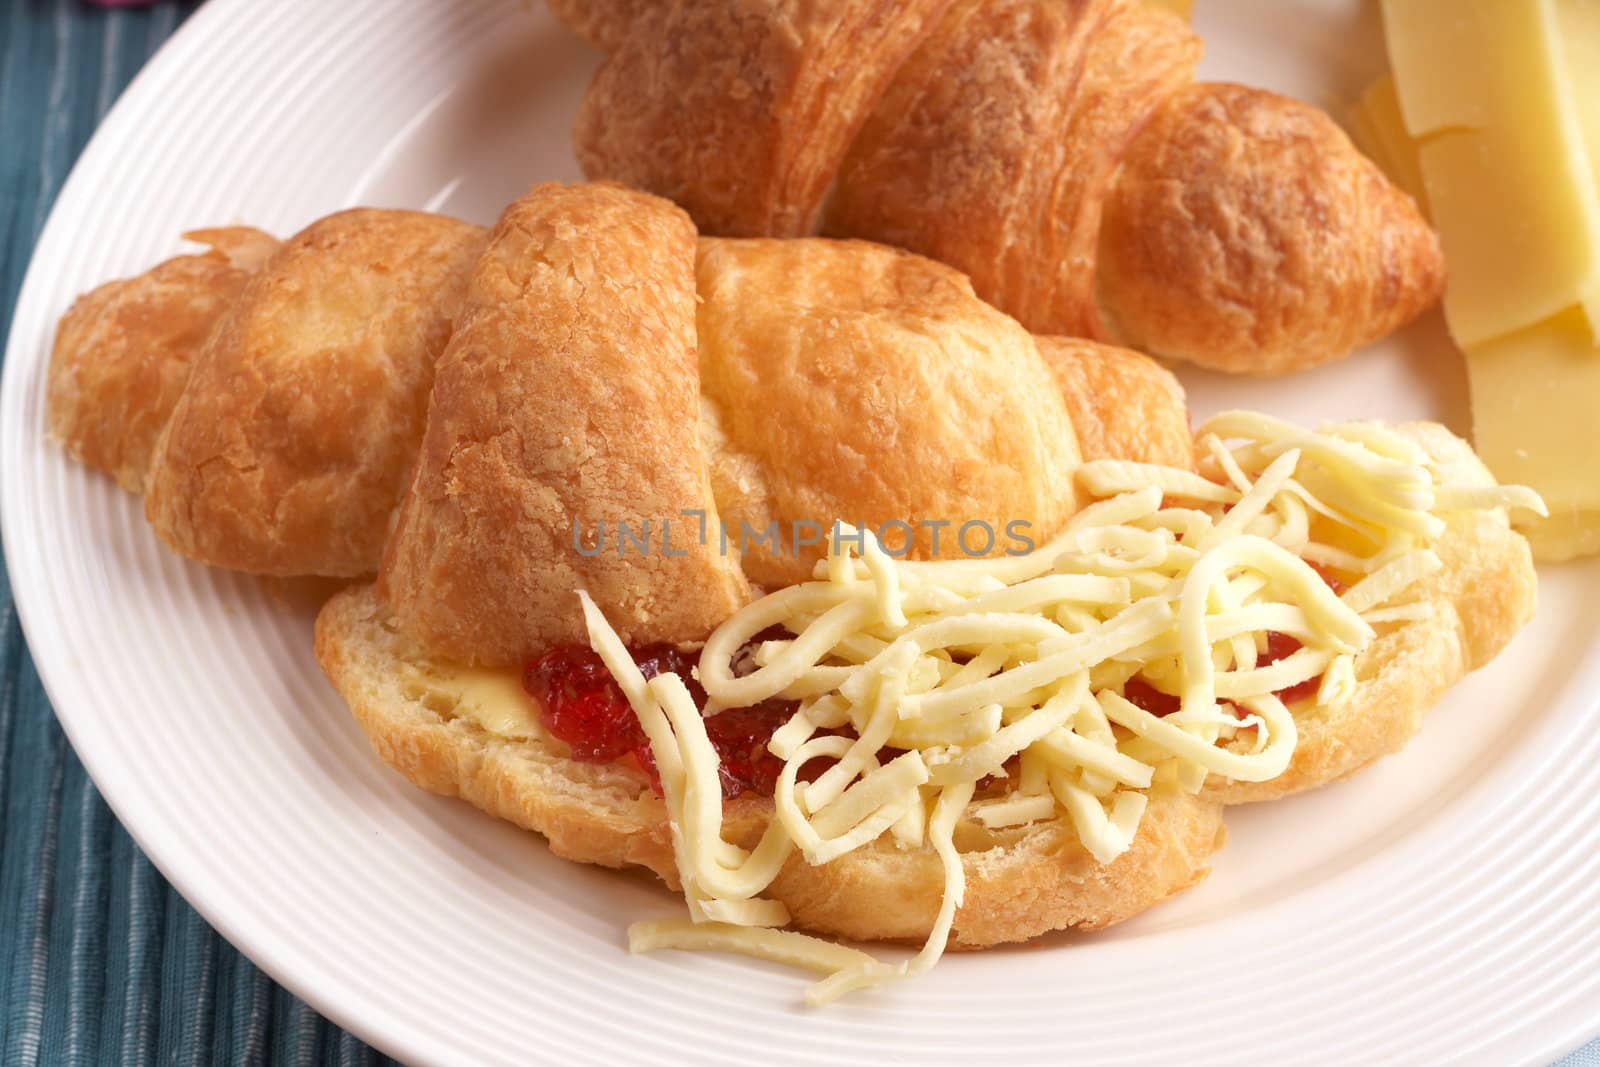 Breakfast plate with freshly baked croissants filled with jam and grated mozzarella cheese